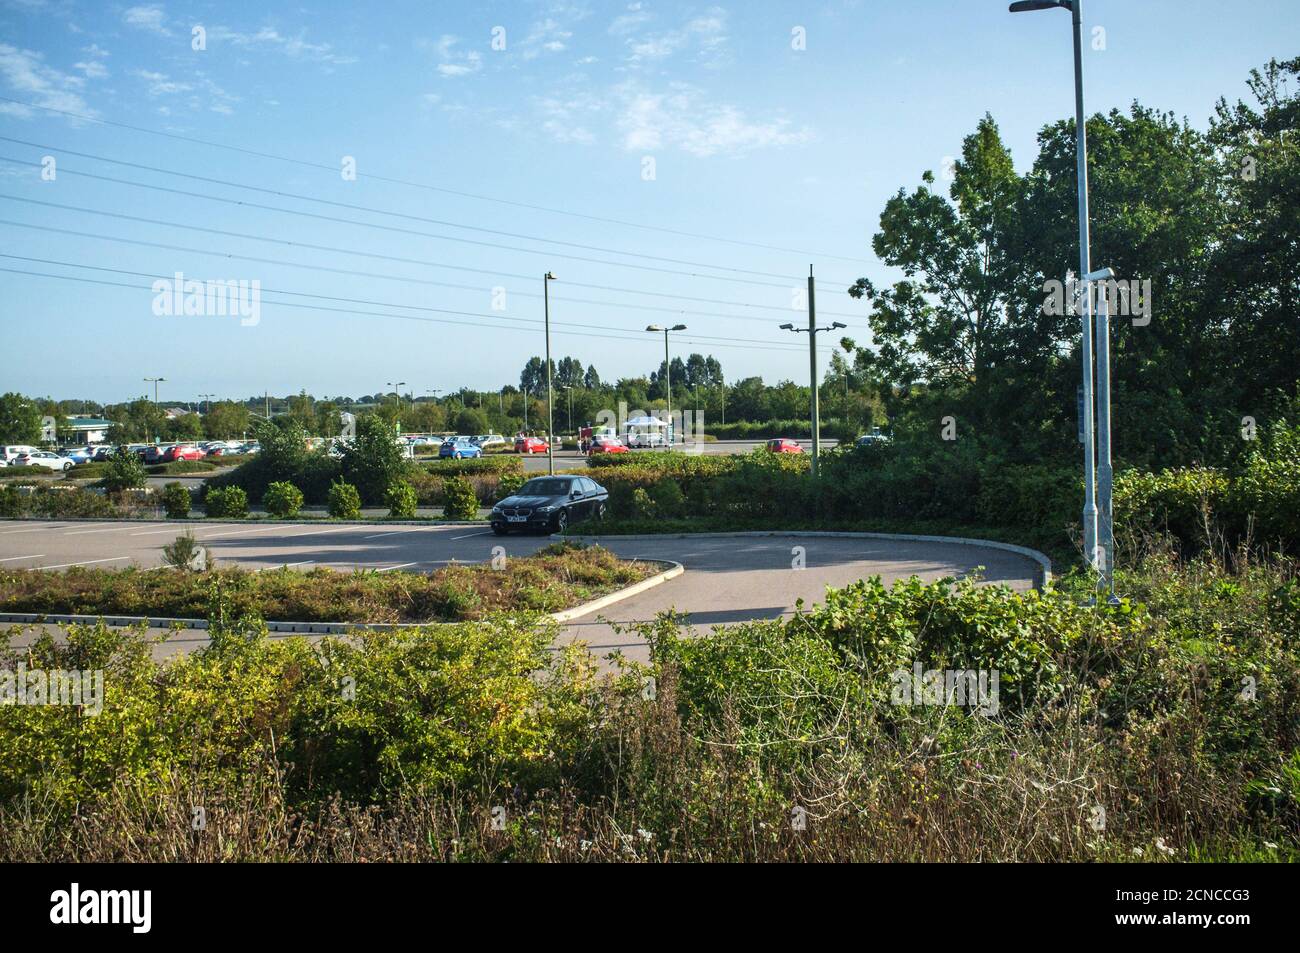 September 18th 2020 Oxford Parkway car park which is usually full by mid-morning during the week days, suggesting that many commuters are working from home. The testing station entrance can be seen in the background. Bridget Catterall/Alamy Live News Stock Photo